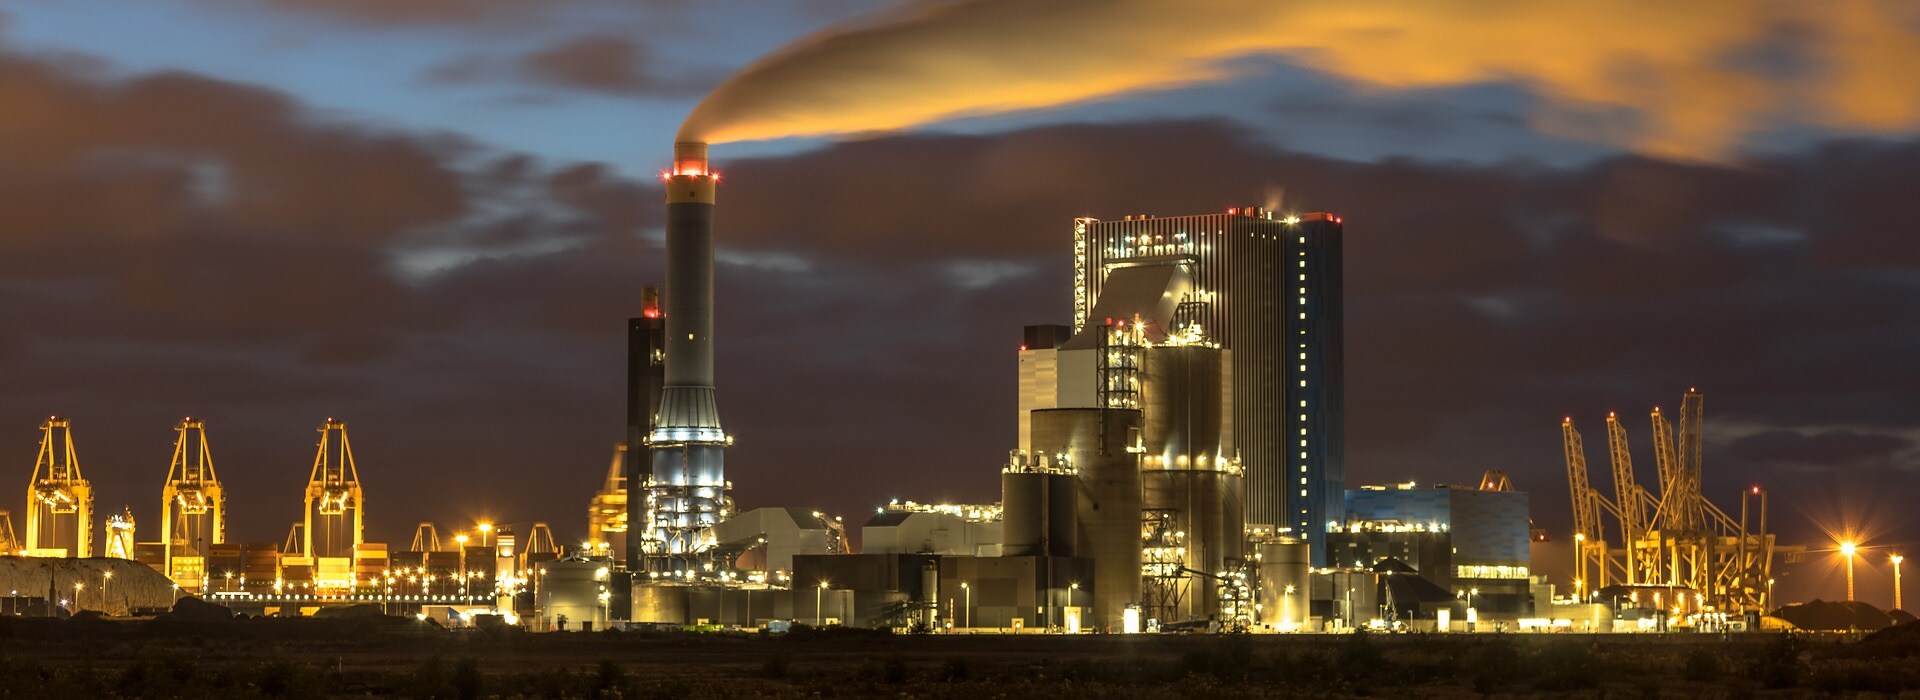 Industrial landscape with illuminated clouds at night in Europoort, Maasvlakte Rotterdam